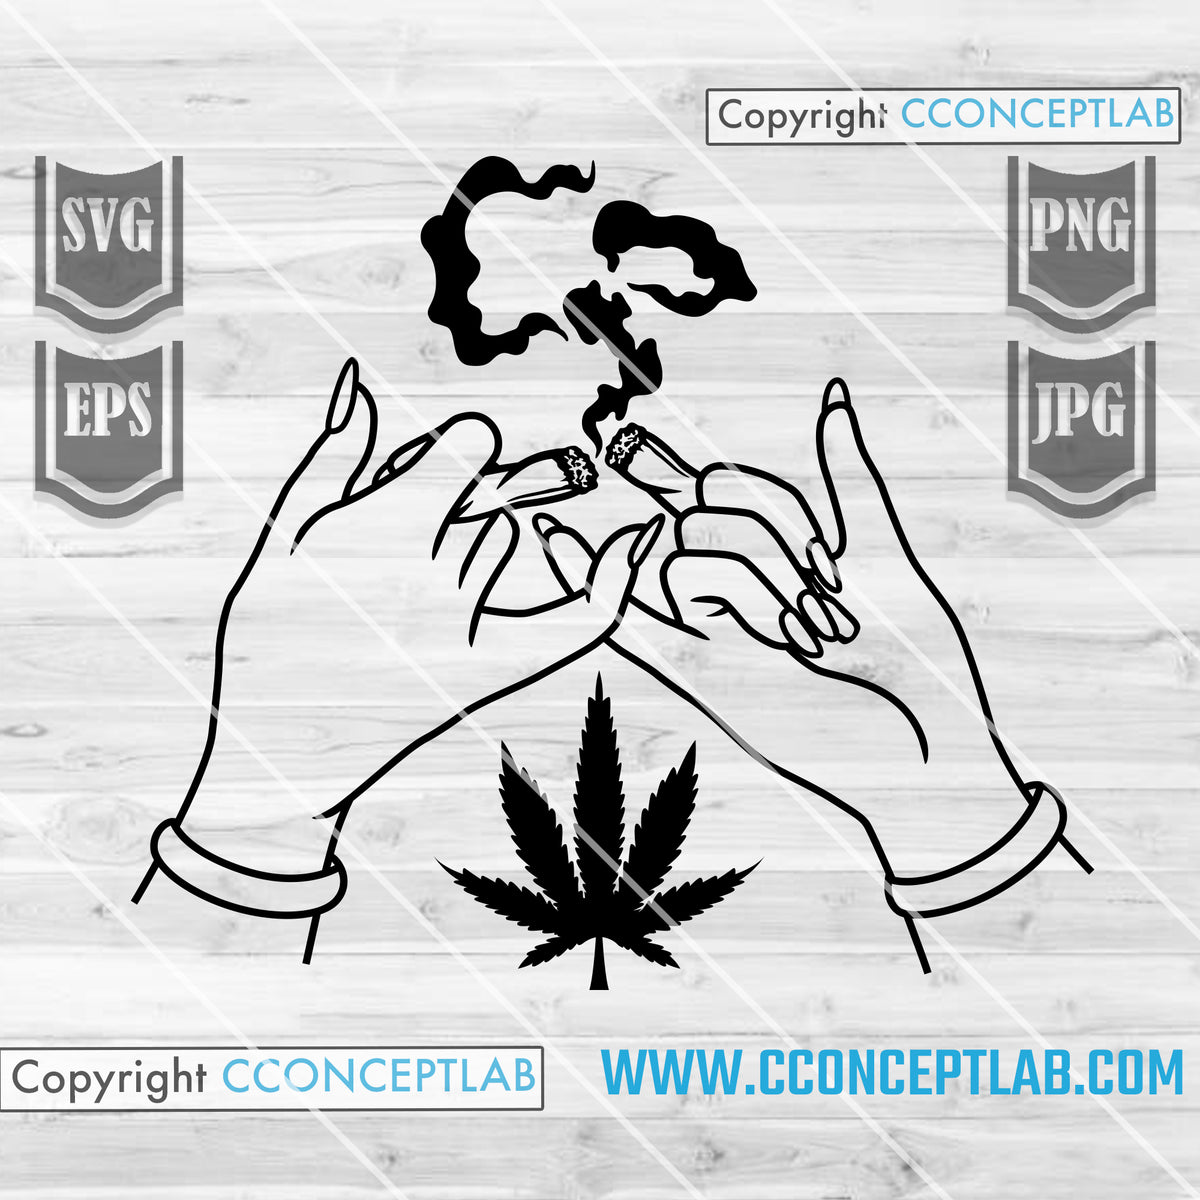 CconceptLab - Best Friend Hand Sign Smoking Joint – cconceptlab